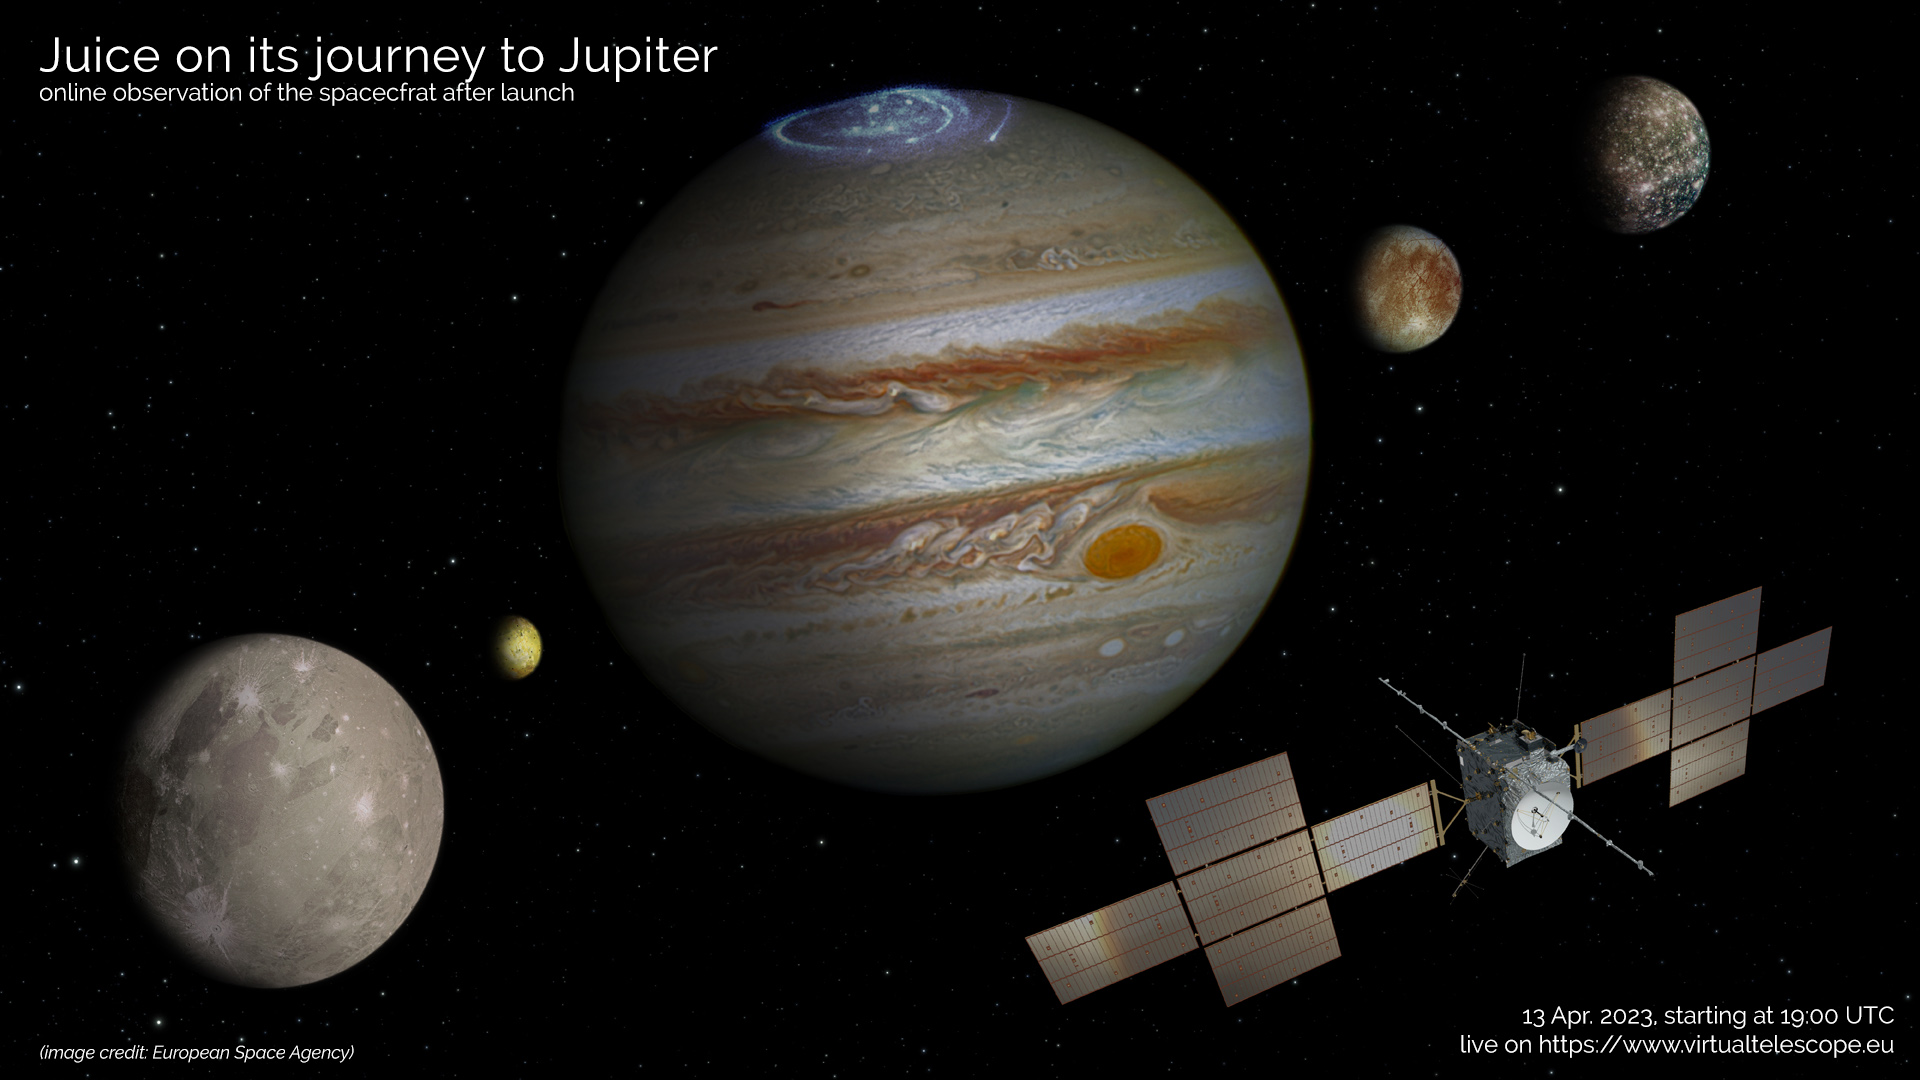 Juice on its way to Jupiter: poster of the event.